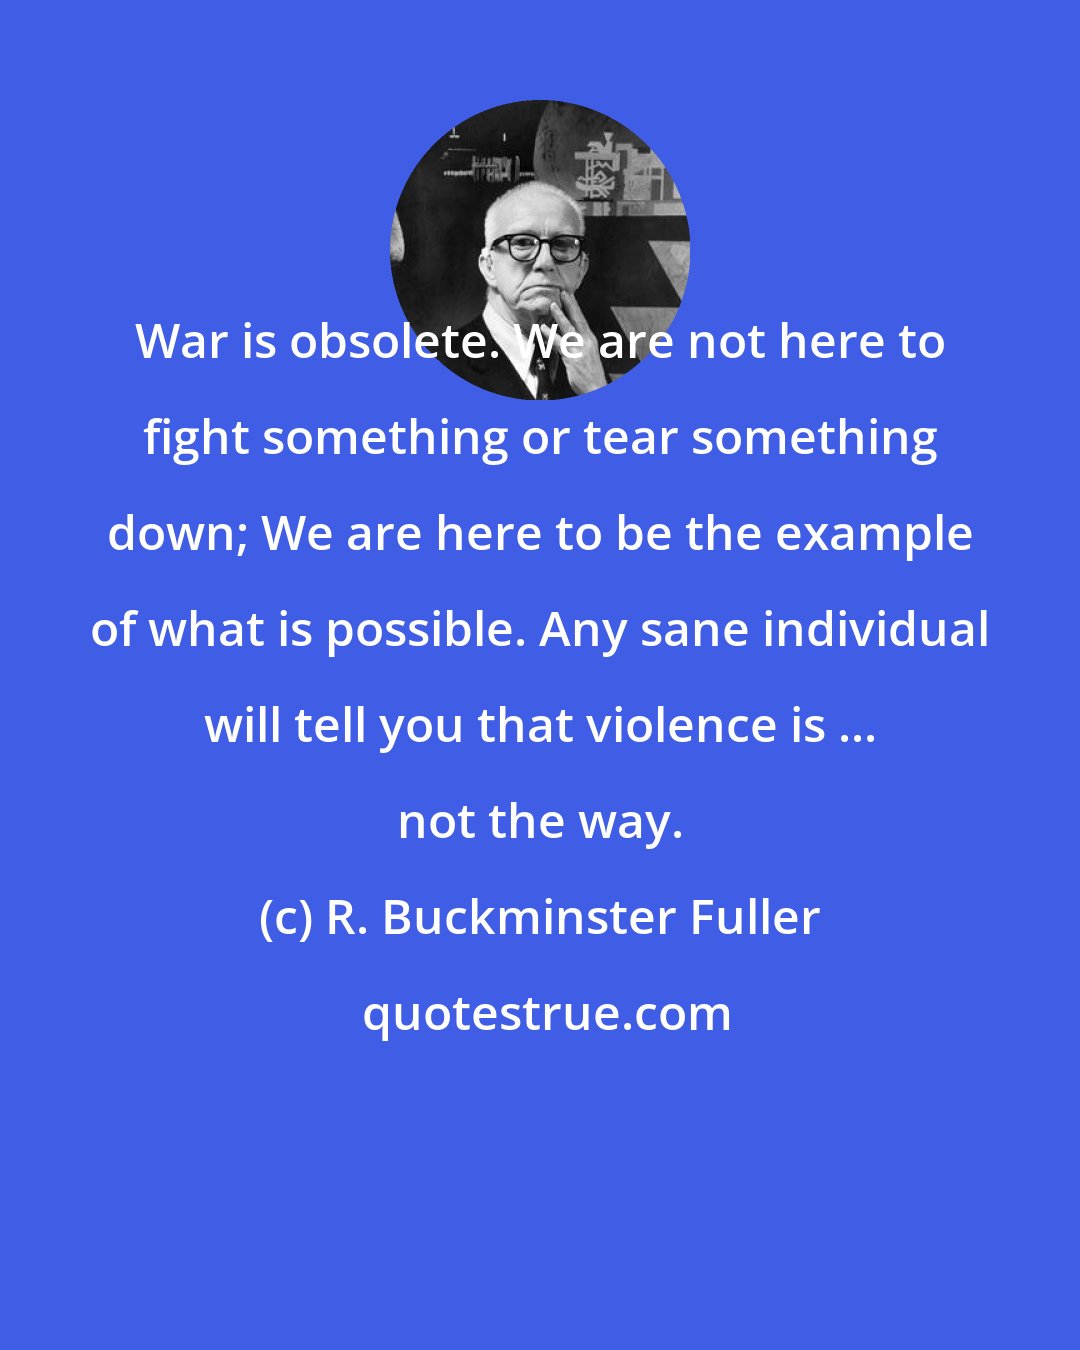 R. Buckminster Fuller: War is obsolete. We are not here to fight something or tear something down; We are here to be the example of what is possible. Any sane individual will tell you that violence is ... not the way.